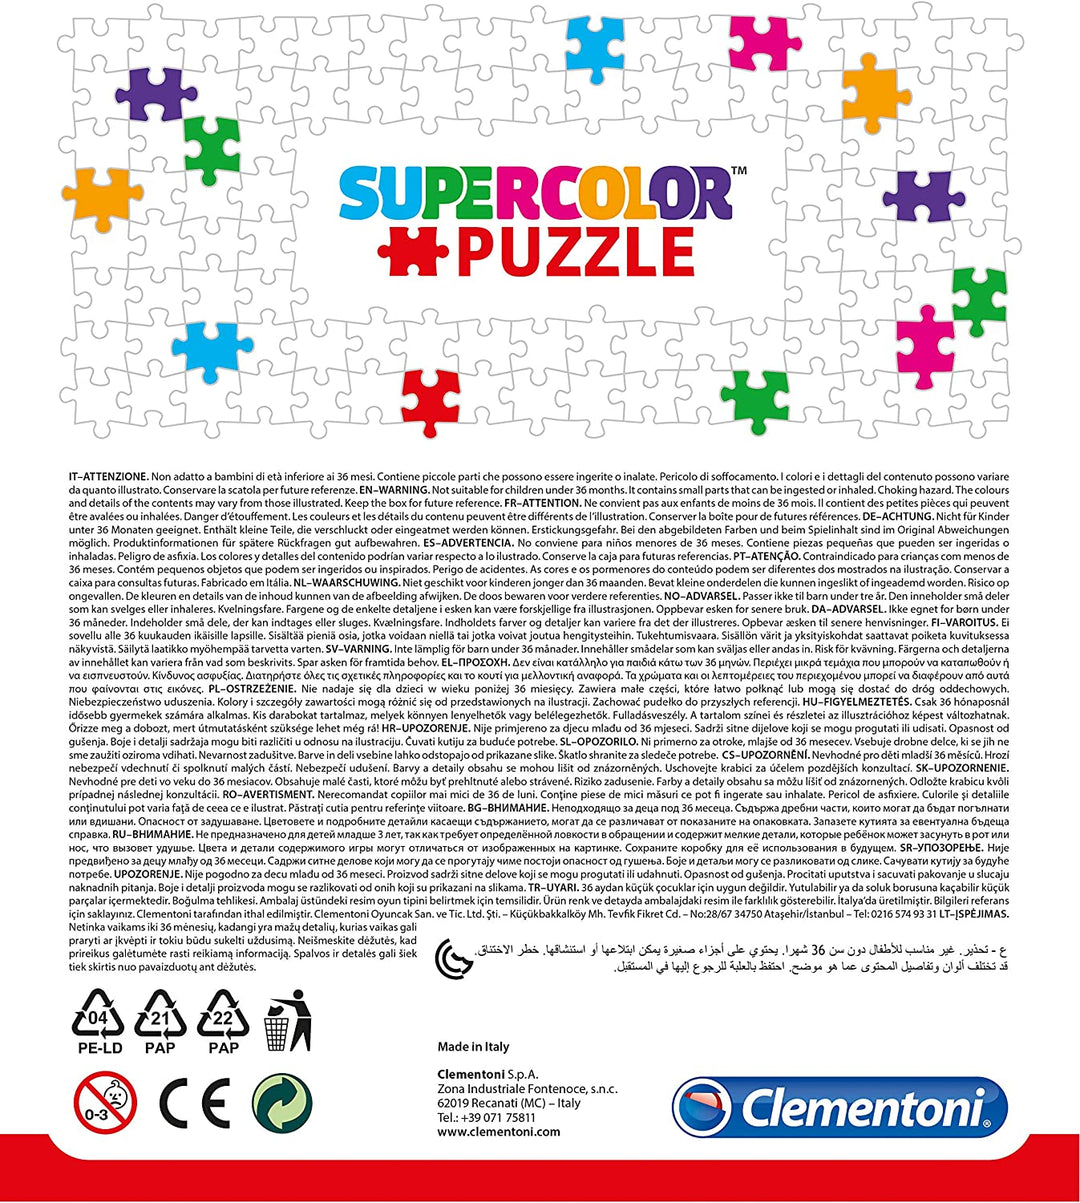 Clementoni - 24761 - Supercolor Puzzle - Disney Toy Story 4 - 2 x 20 pieces - Made in Italy - jigsaw puzzle children age 3+